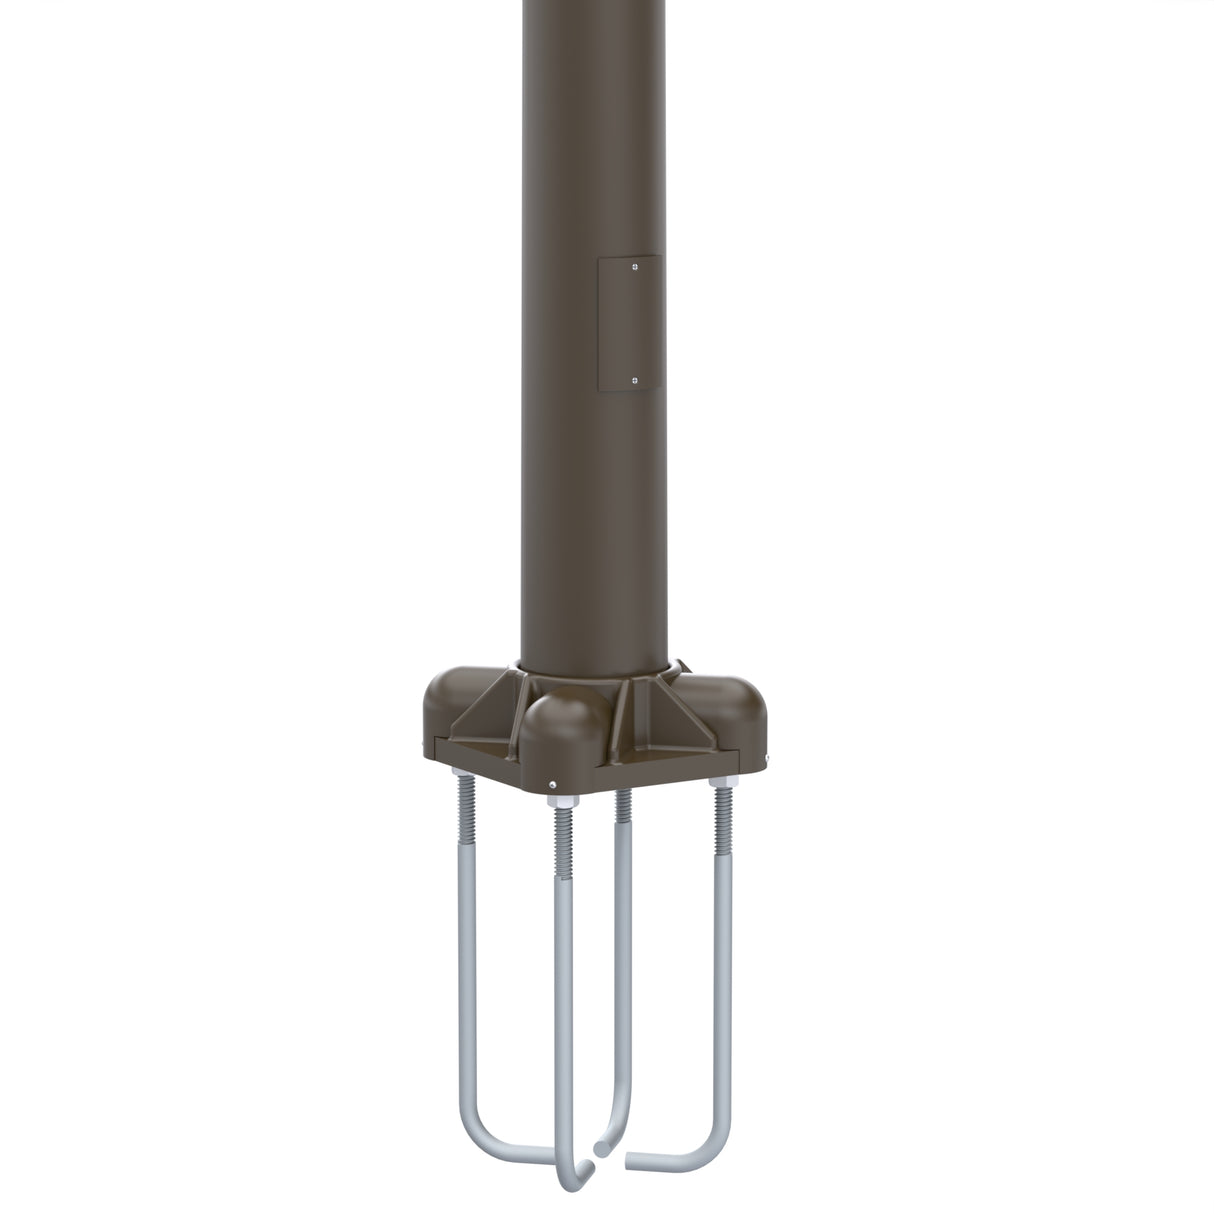 40' Tall x 8.0" Base OD x 4.5" Top OD x 0.188" Thick, Round Tapered Aluminum, Anchor Base Light Pole with 4' Davit Arm